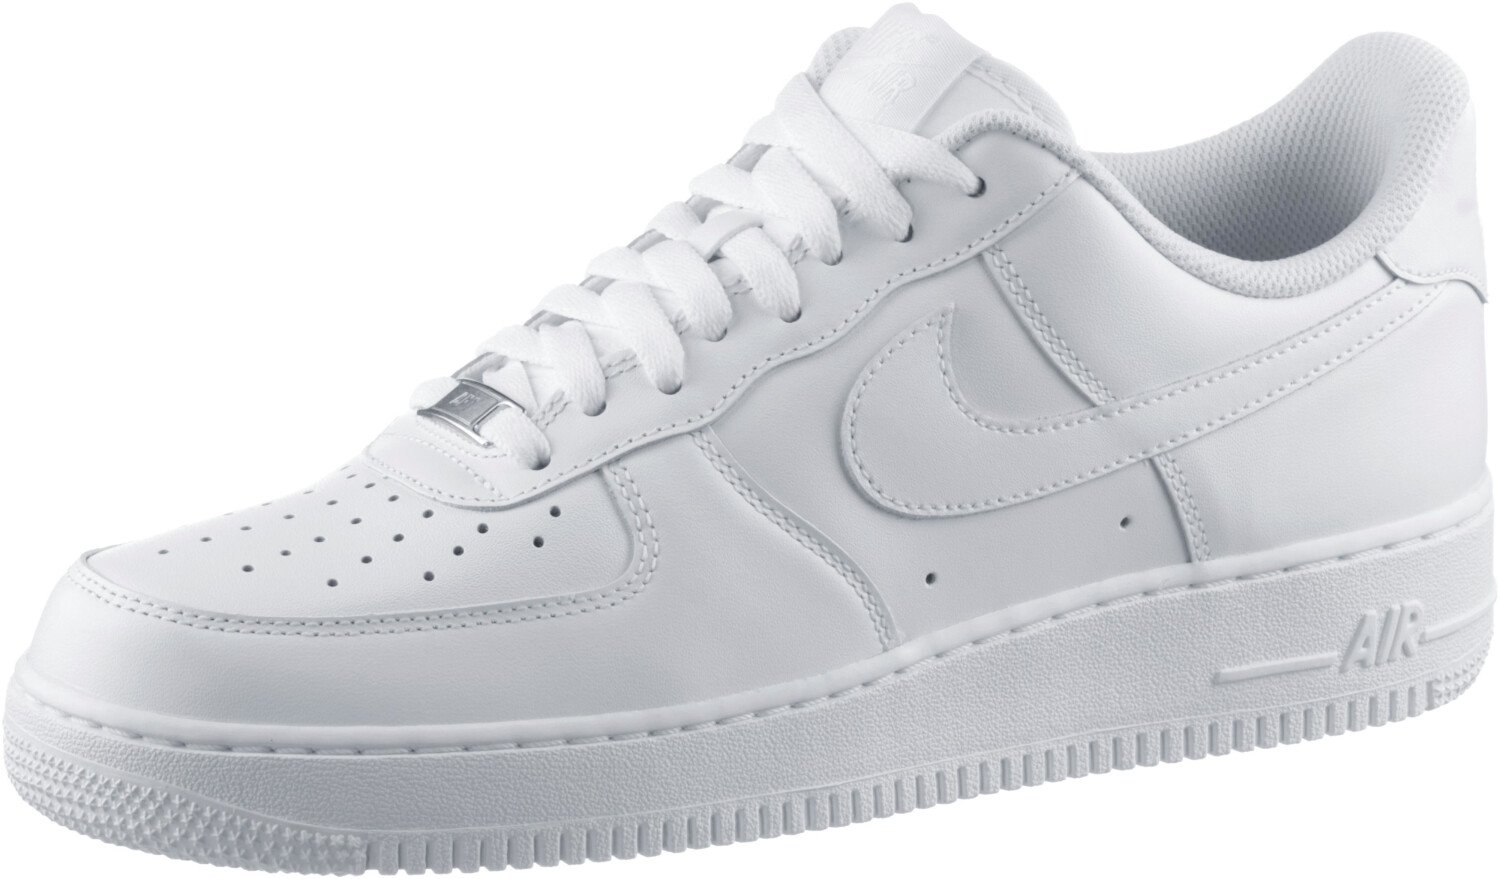 Buy Nike Air Force 1 '07 all white from Â£151.58 (Today) â Best Deals on idealo.co.uk